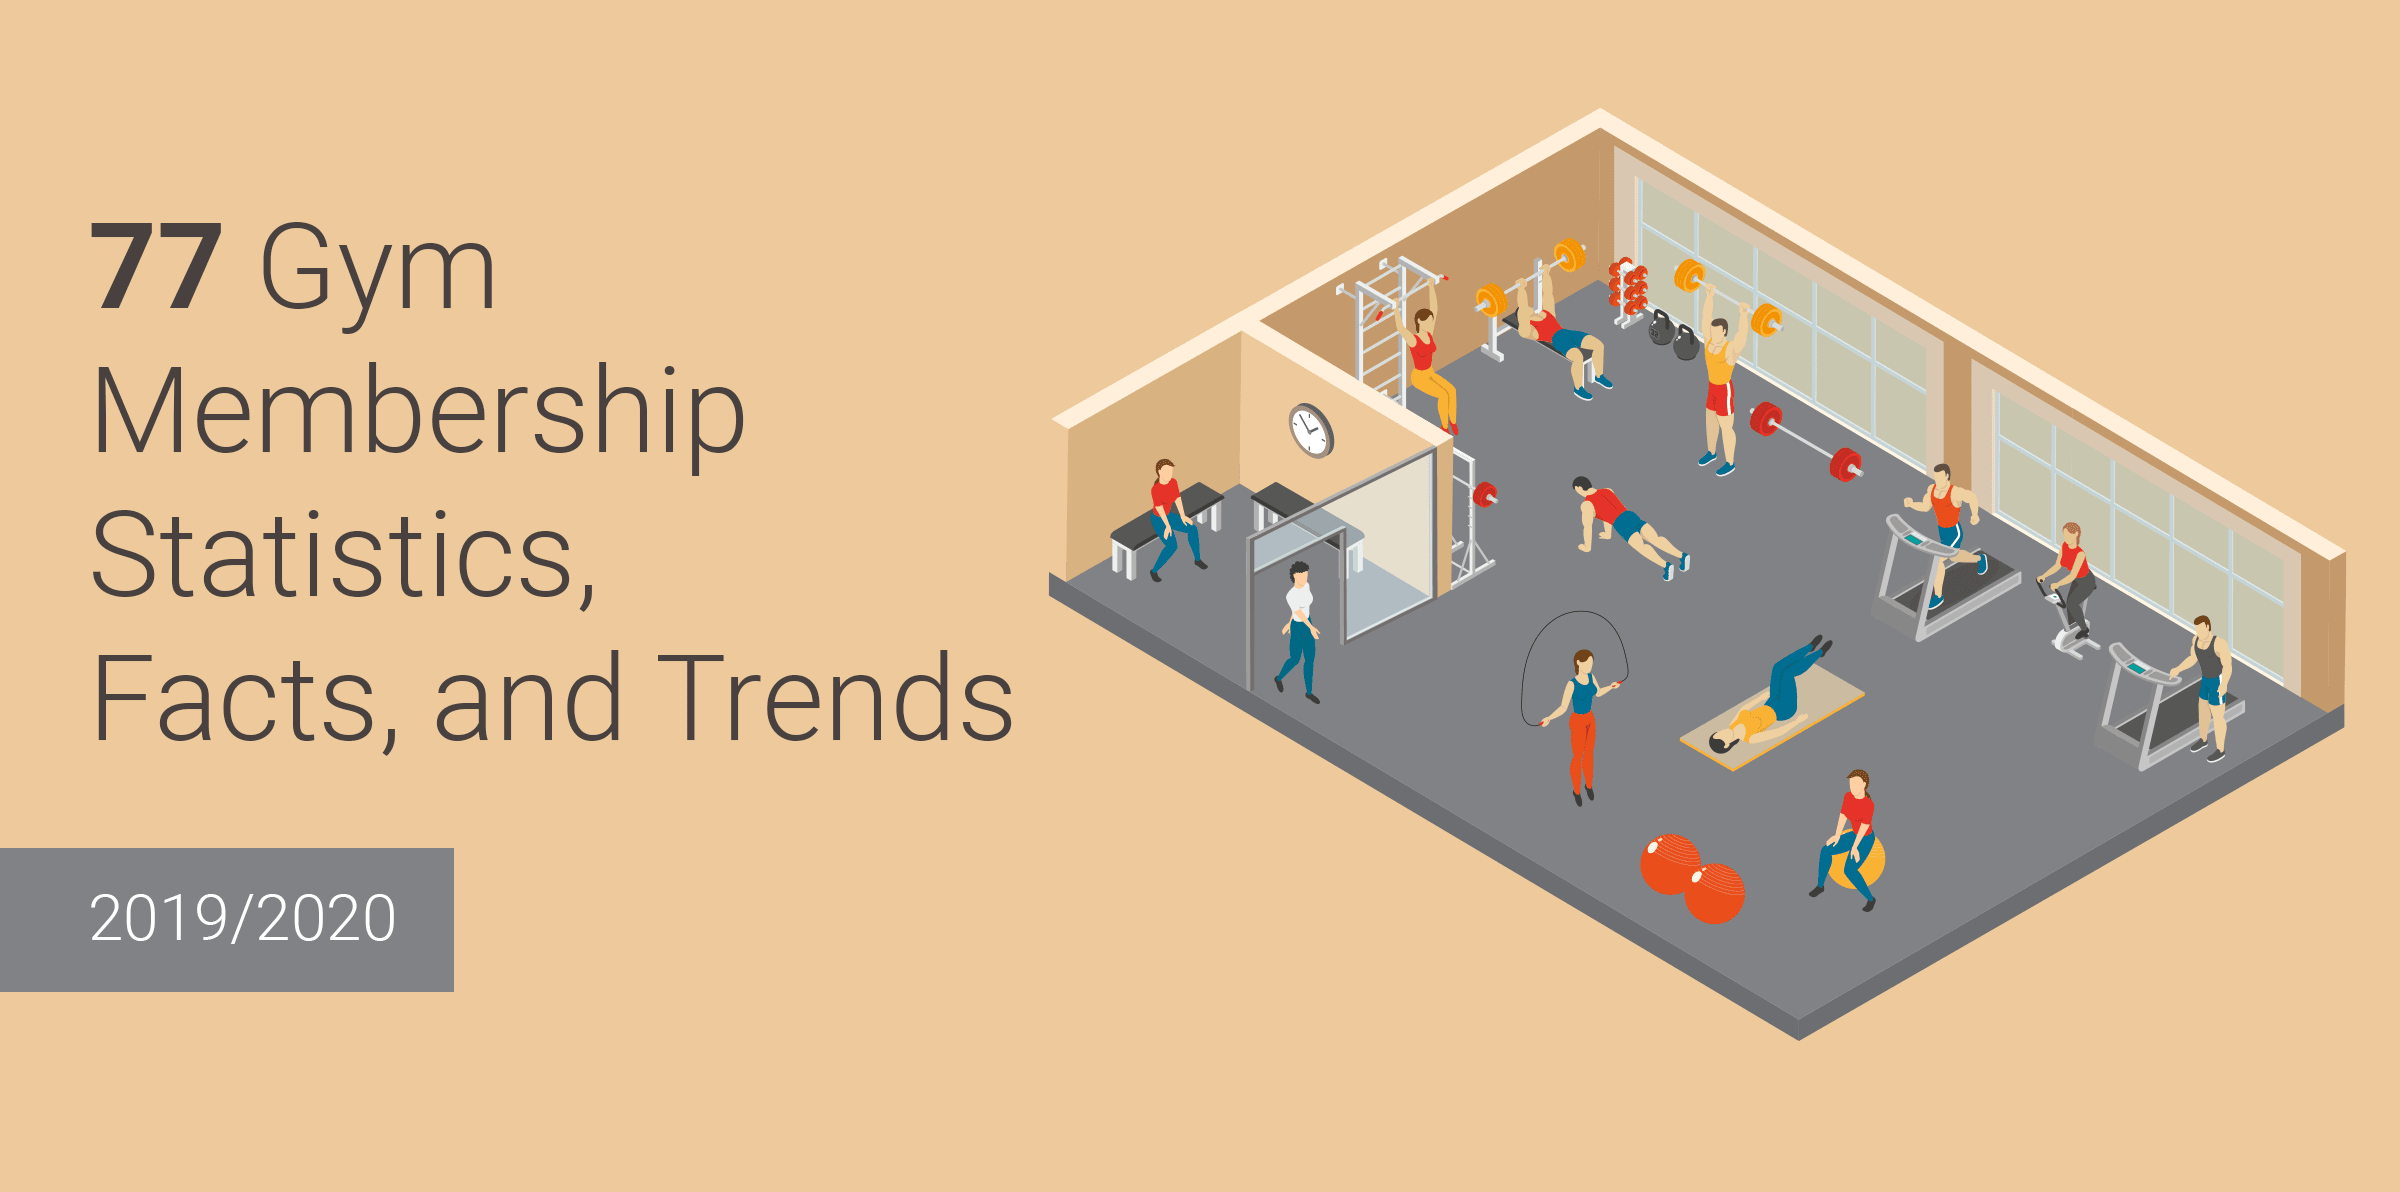 77 Gym Membership Statistics, Facts, and Trends [2020/2021